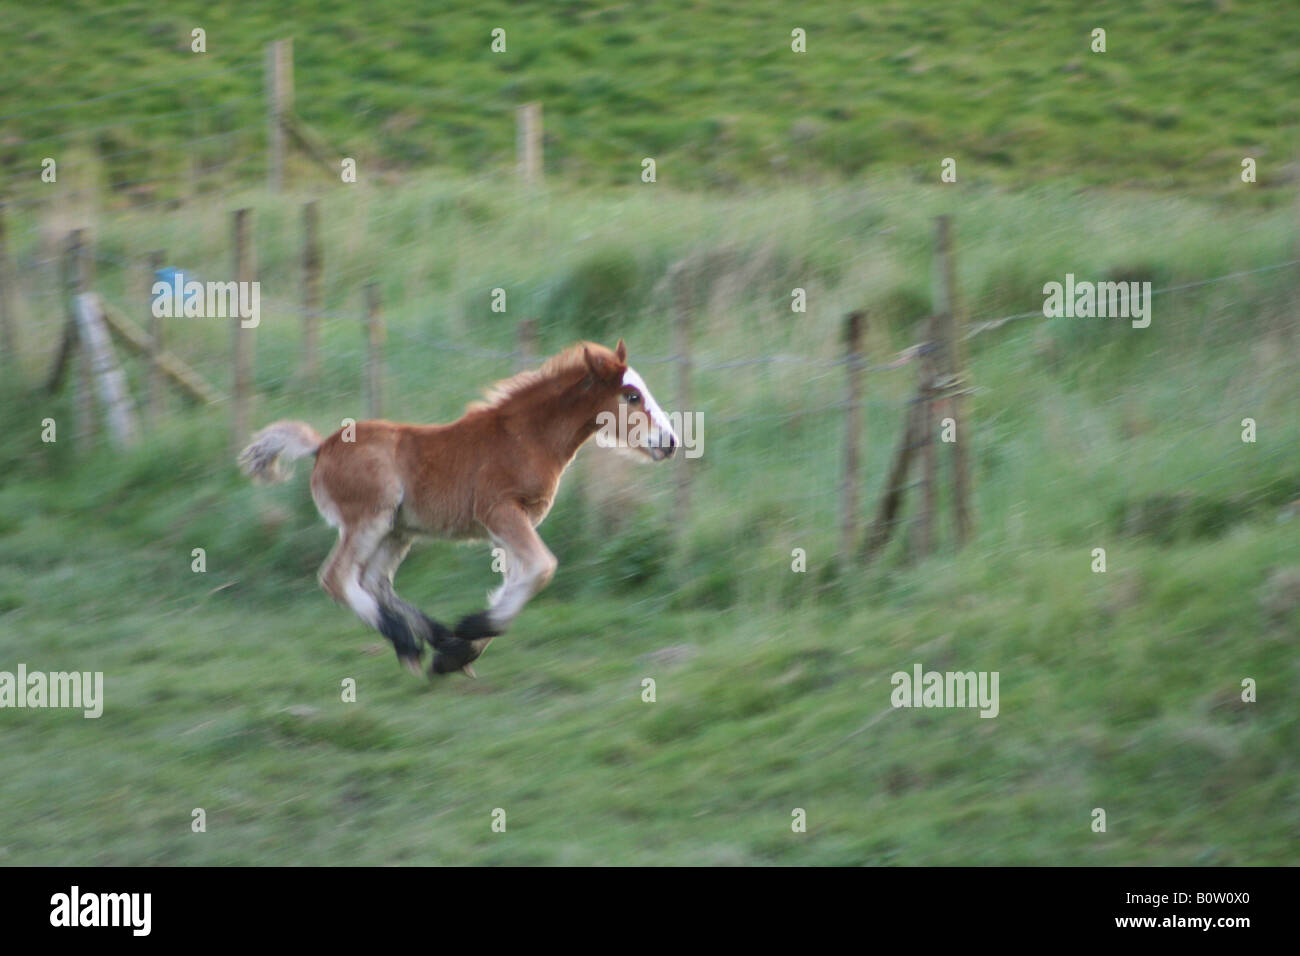 Foal Running in Field near St Athan Vale Stock Photo